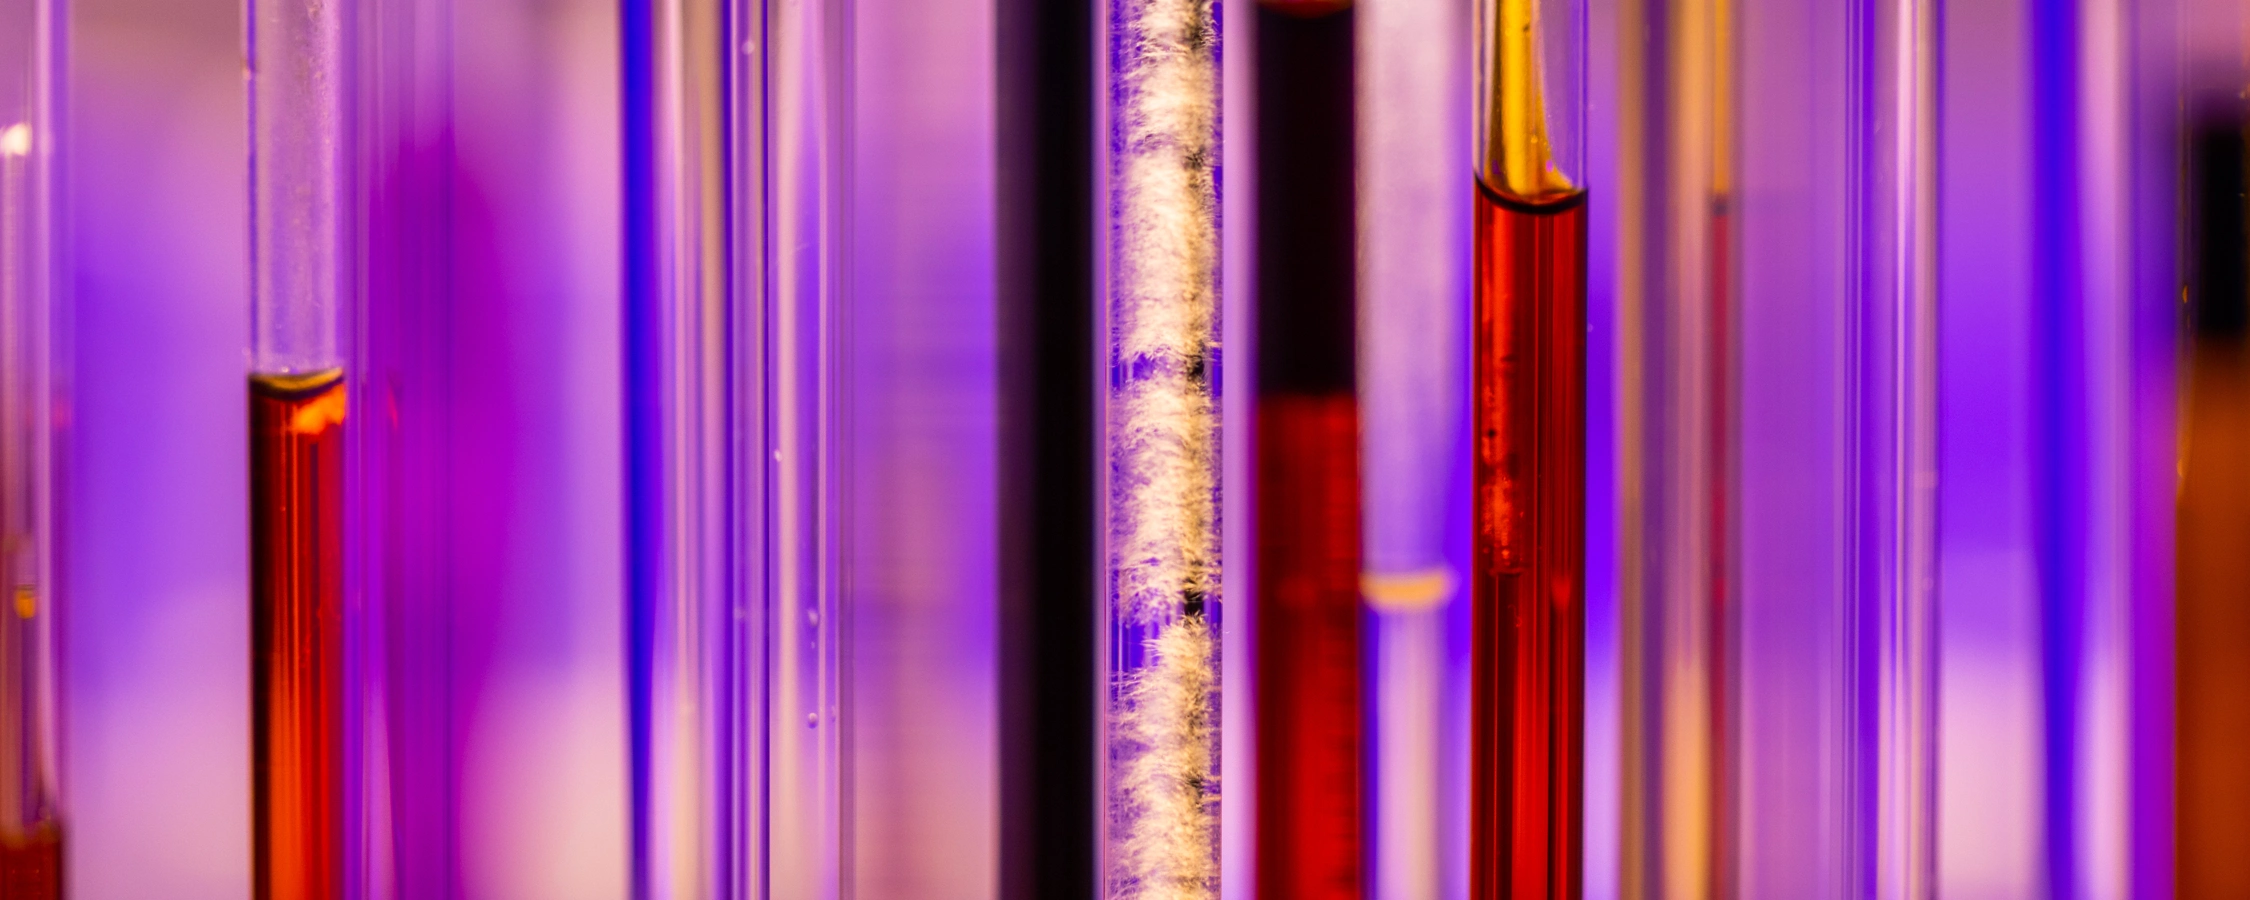 Close up image of liquid solutions in the lab